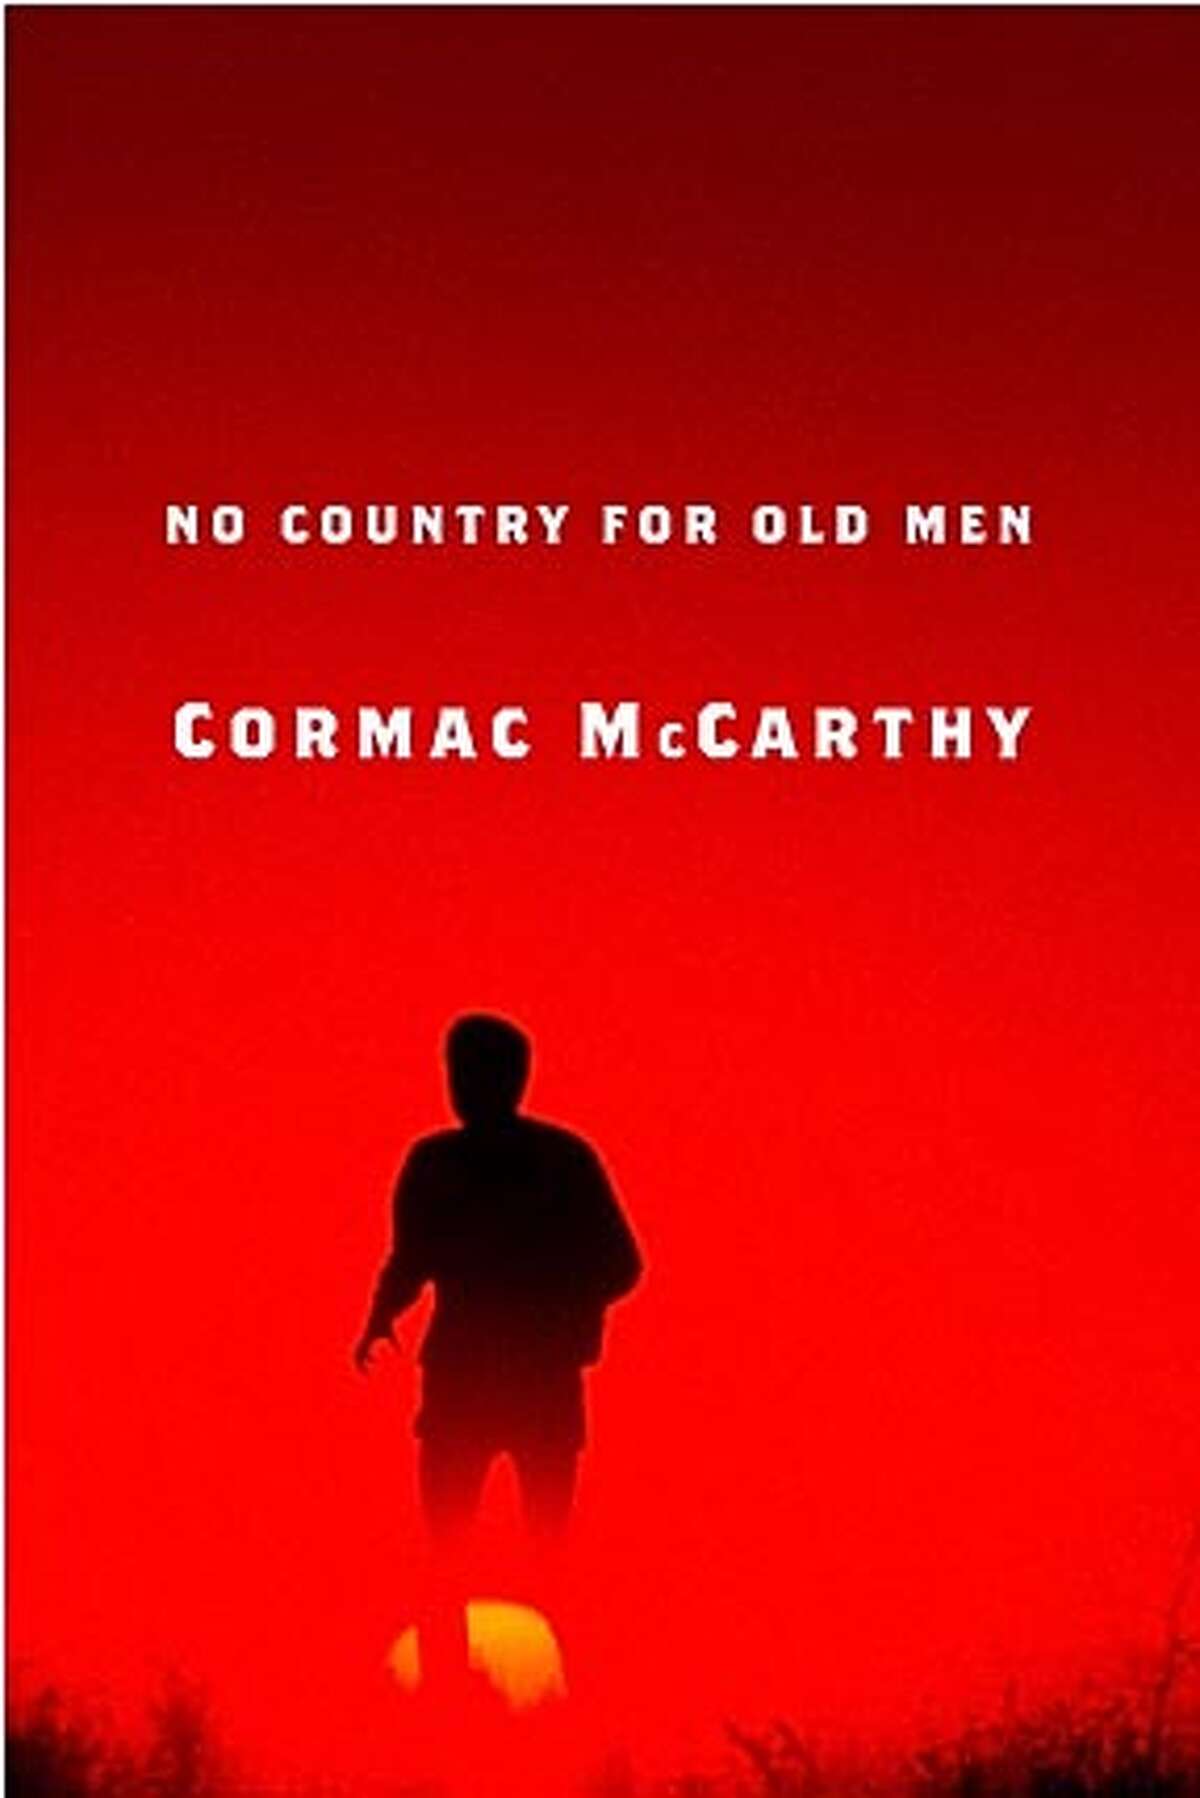 Undated handout photograph shows the cover of the new book "No Country For Old Men", written by Cormac McCarthy, who has a reputation as one of America's best living writers. The new book is a violent modern-day Western about a man who finds a suitcase filled with $2 million of drug money in the desert in a car whose occupants have been shot. To match feature Arts-Recluses NO ARCHIVE REUTERS/Random House/Handout 0 BookReview#BookReview#Chronicle#07-24-2005#ALL#2star#b4#0423108313